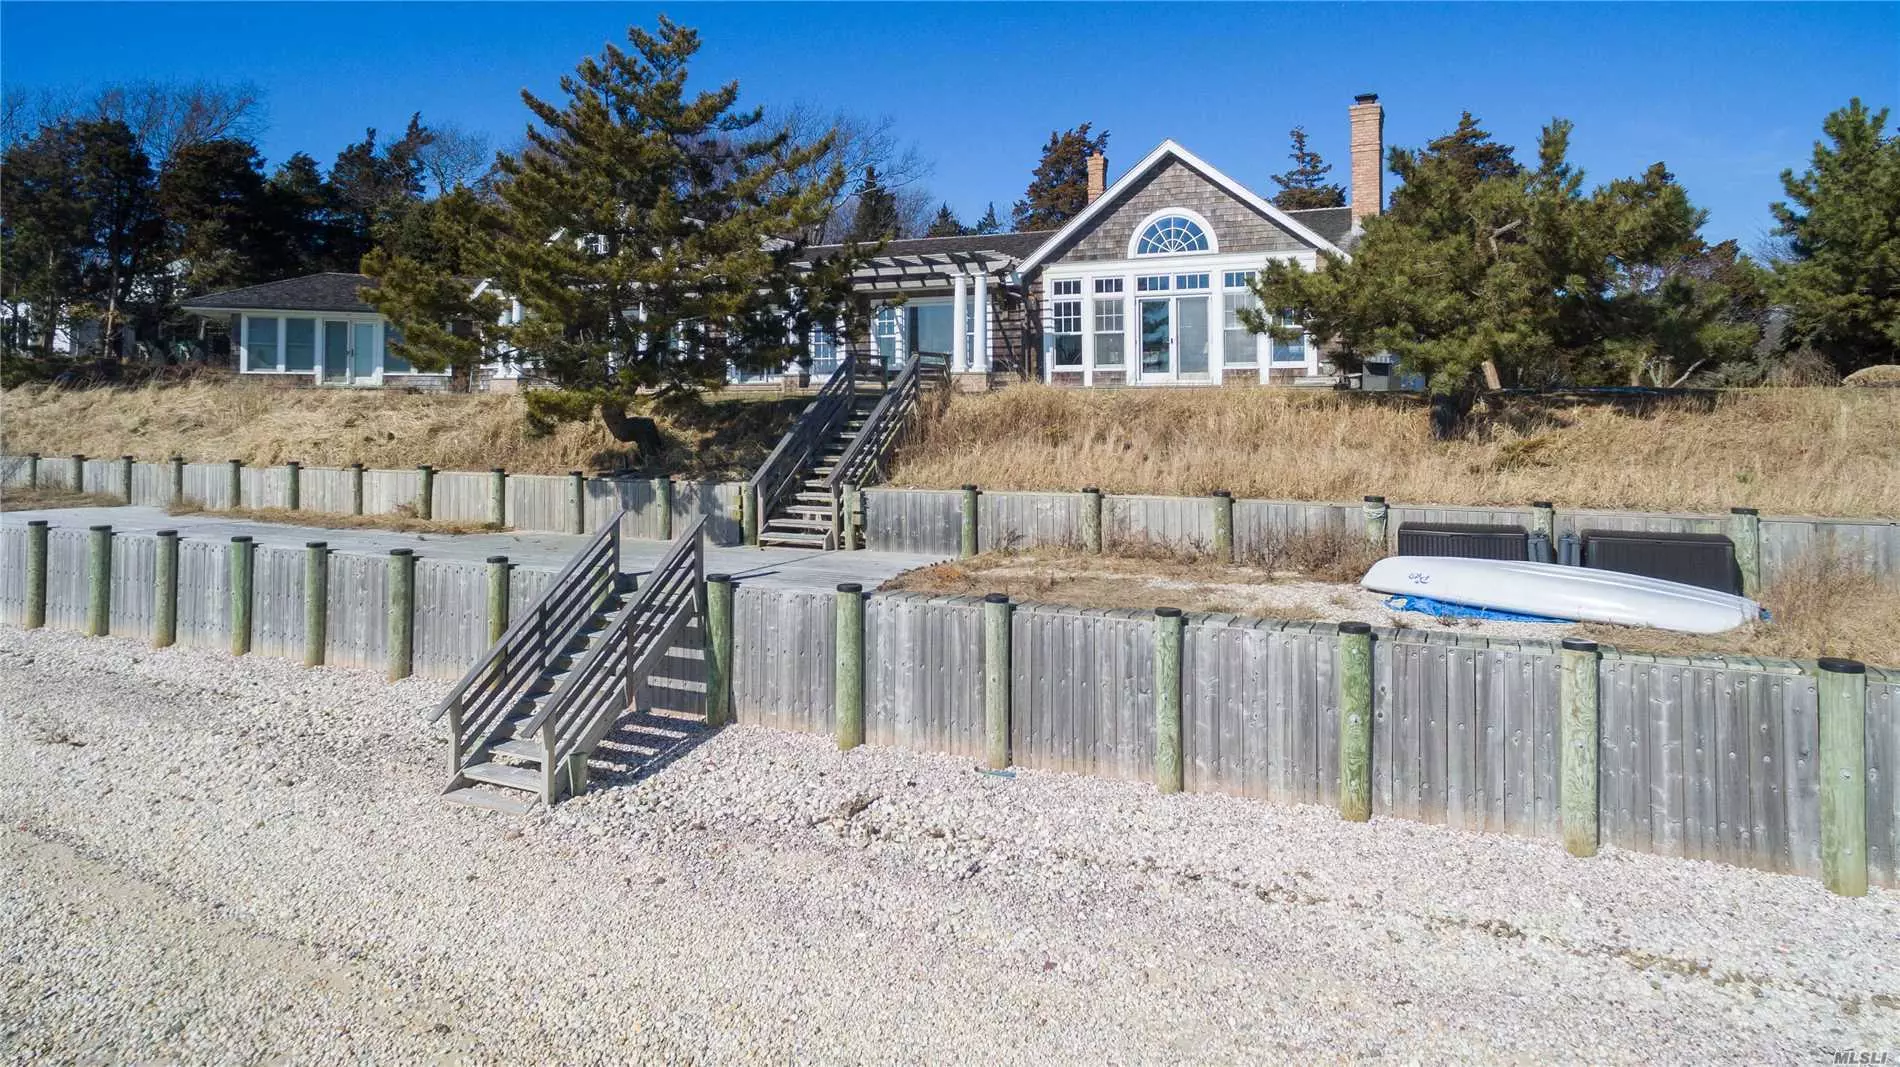 1st Time Offered. Gorgeous Nantucket Style Home. Gut Renovated. 200&rsquo; Direct Waterfront And Beach With Incredible Views From All Principal Rooms. Slate Patios, Beach Decks And Al Fresco Dining - All With Direct Water Access. Outdoor Shower And Yards Complete The Best In Coastal Living. 5 Bedrooms(King, 3 Queens & 1 Full)